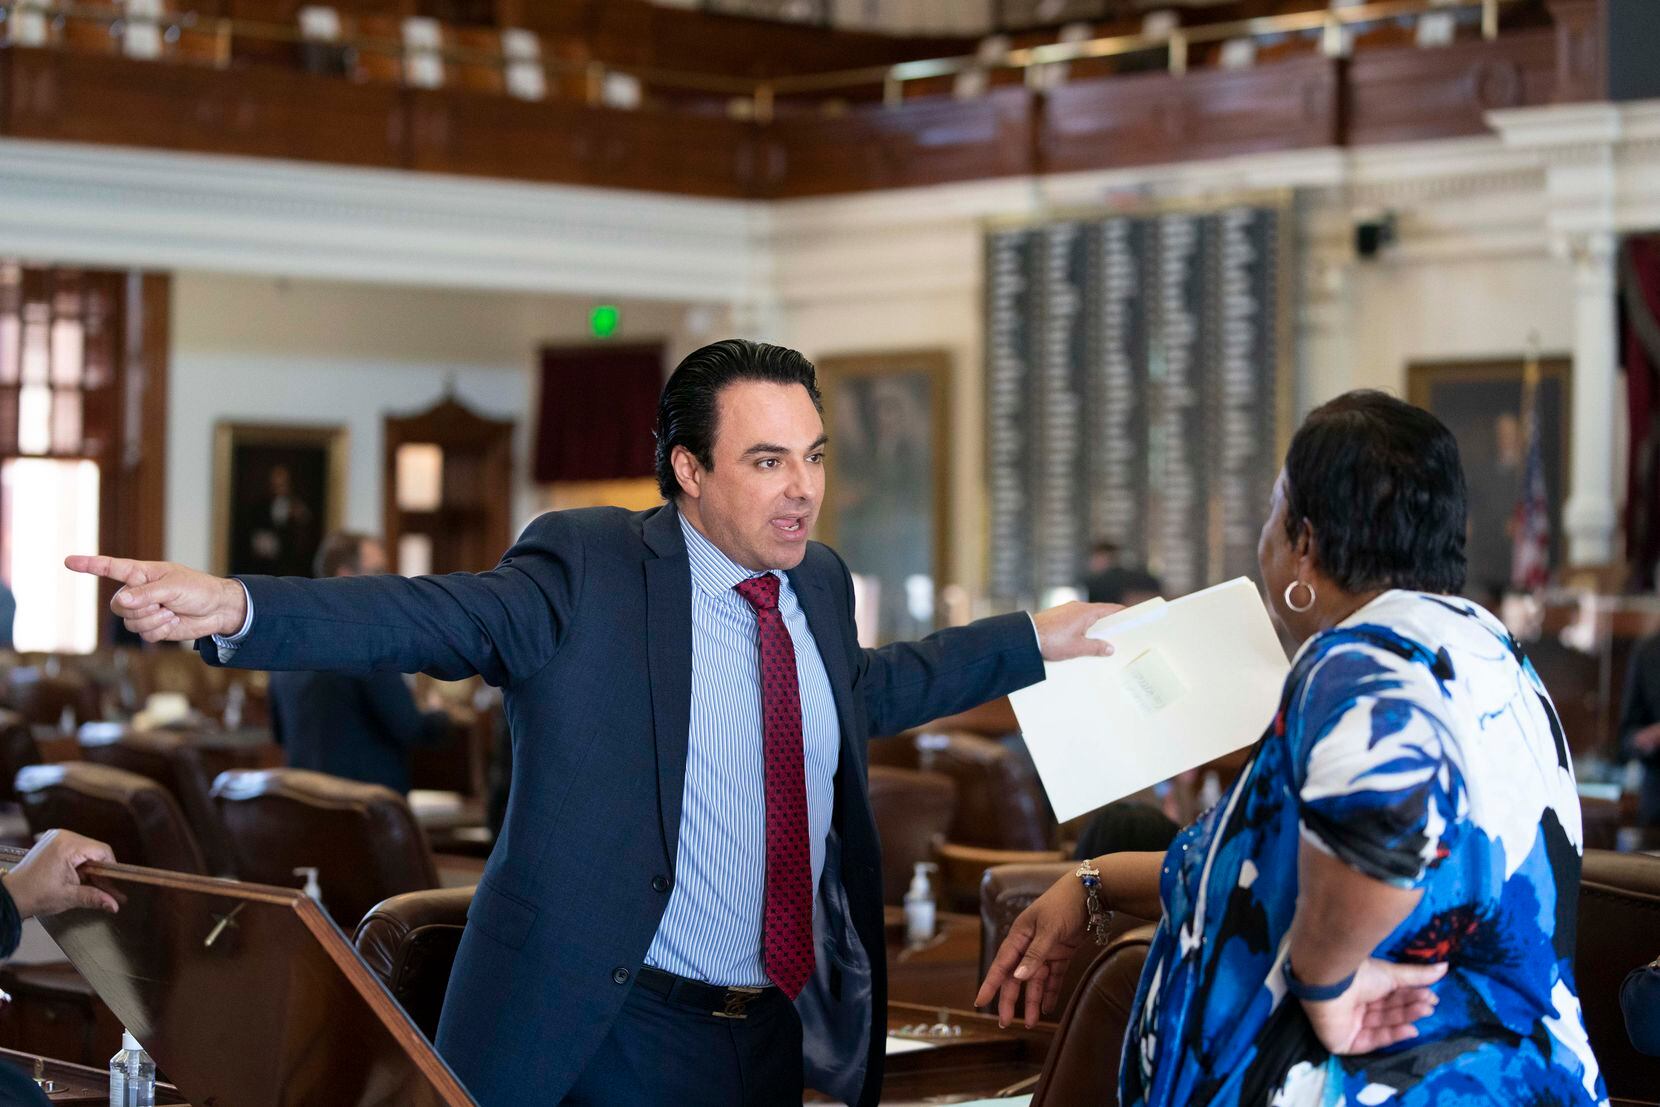 State Rep. Terry Canales, D-Edinburg, talks with Rep. Yvonne Davis, D-Dallas, on the House floor in the waning minutes of the session on May 29, 2021. (Bob Daemmrich/Special Contributor) 